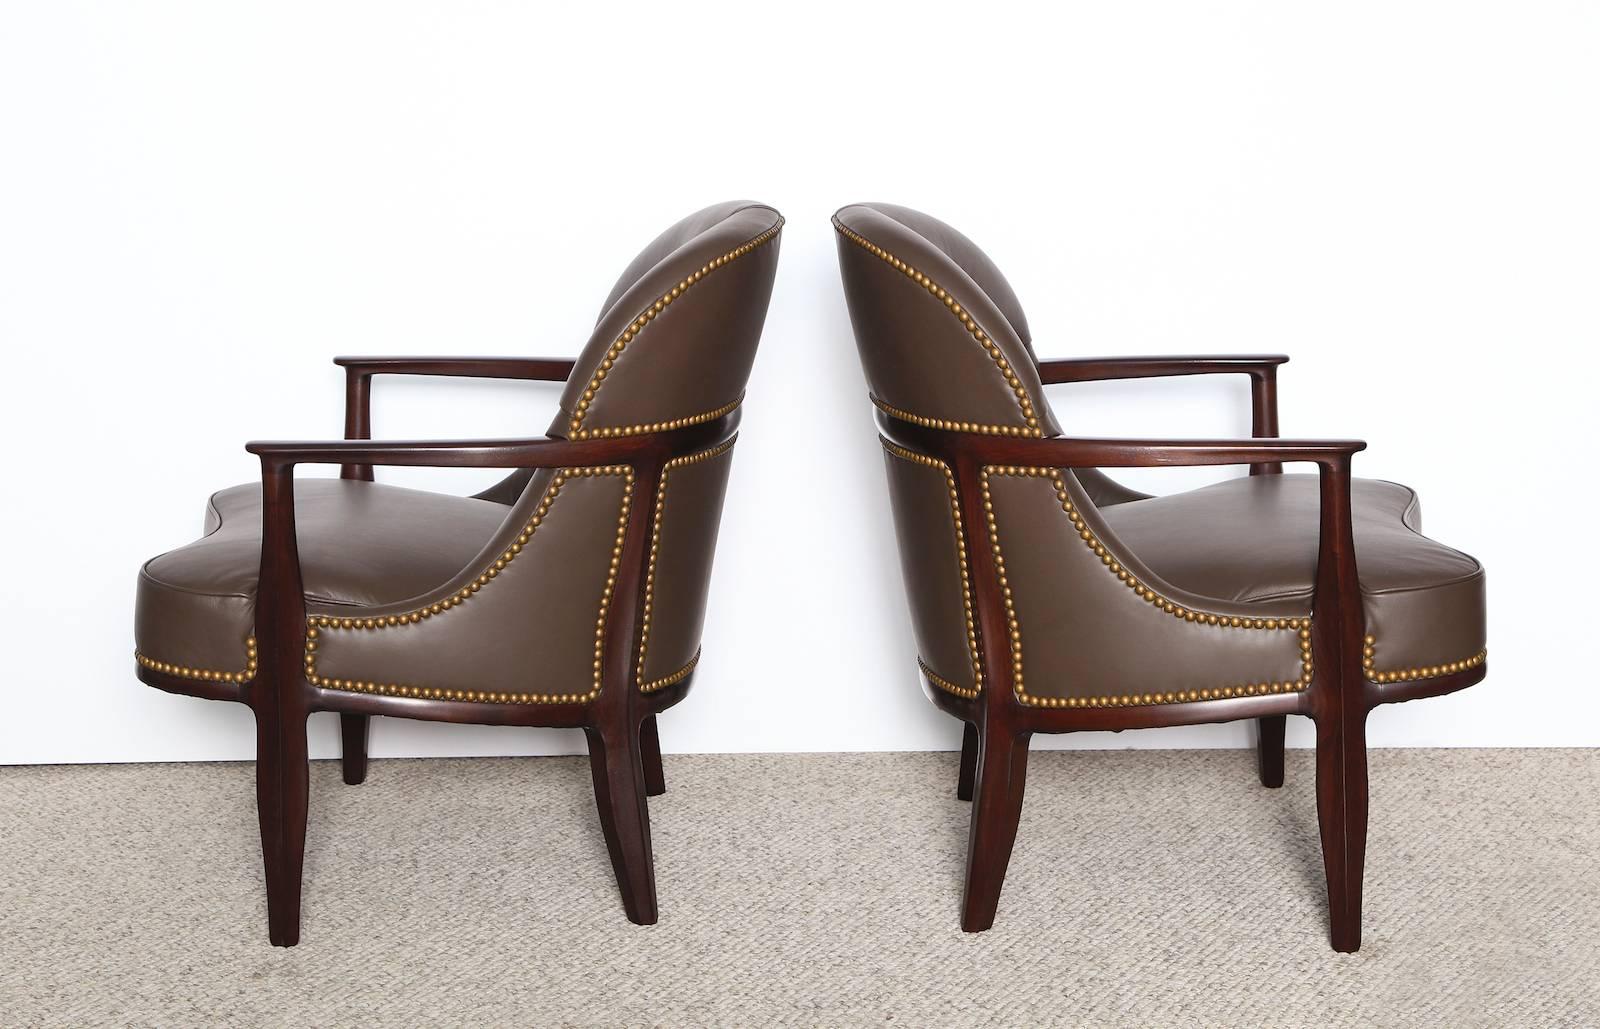 From the Janus Collection. Dark stained mahogany frames with faceted detailing. Cocoa-Brown leather upholstery, with tufting and nail-heads.